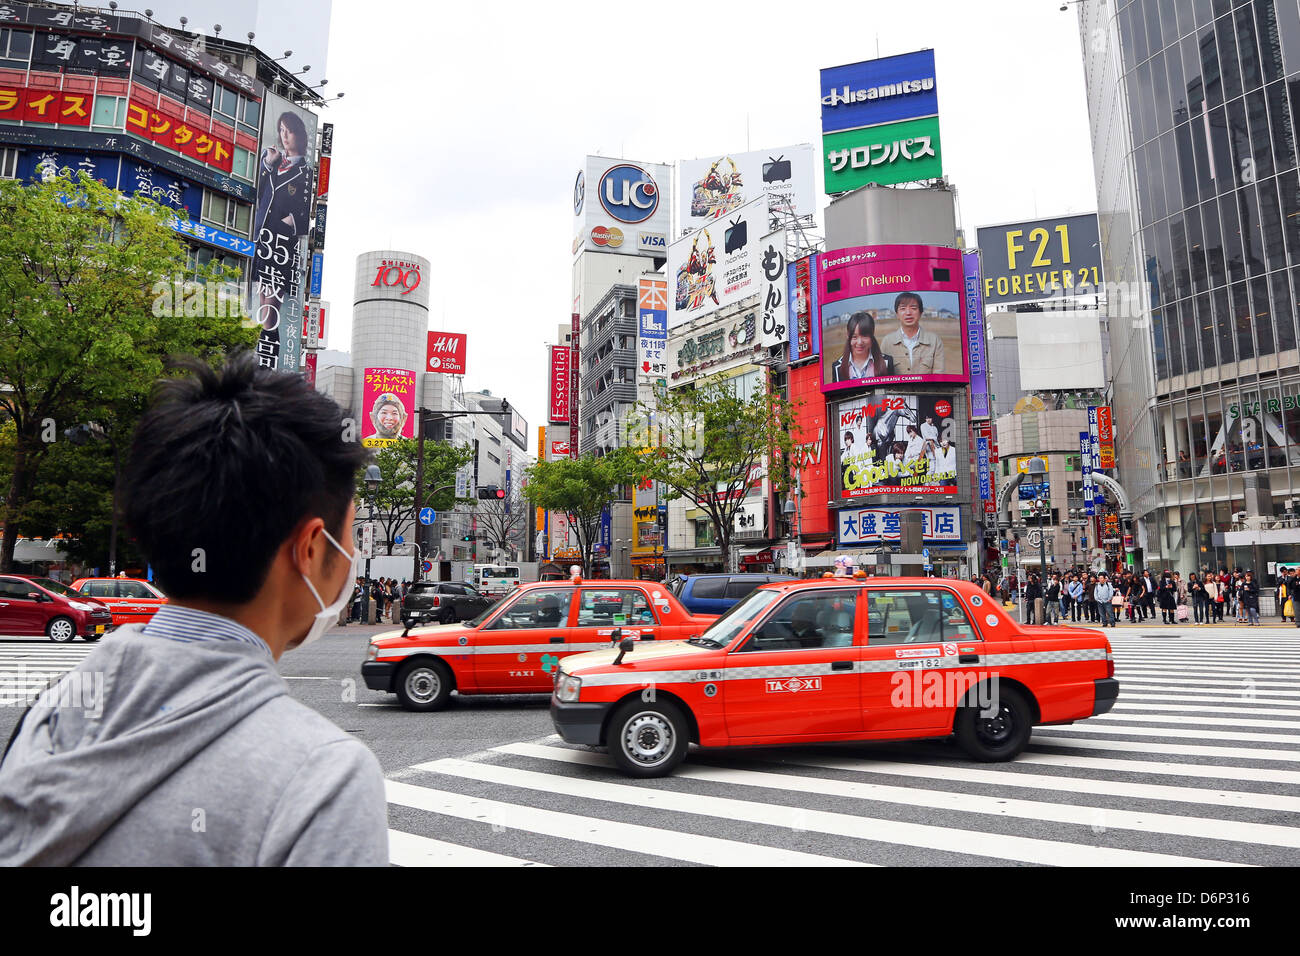 Pedestrian crossing and street scene with Japanese taxi cabs in Shibuya, Tokyo, Japan Stock Photo